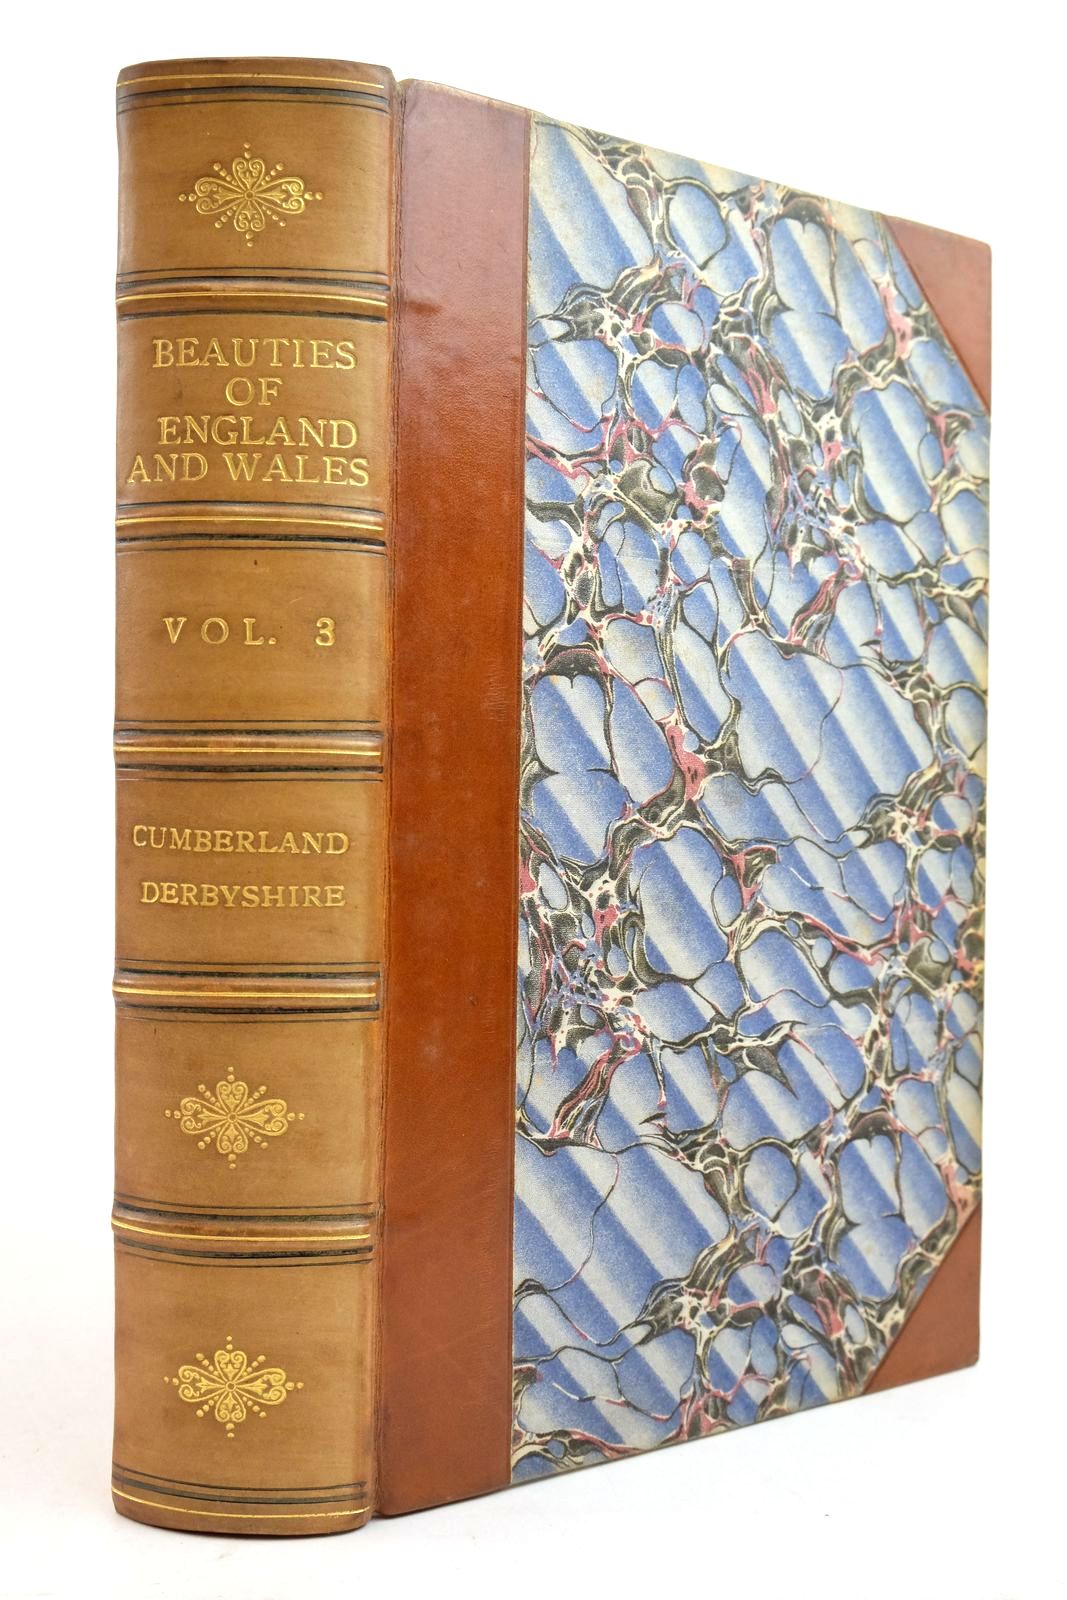 Photo of THE BEAUTIES OF ENGLAND AND WALES VOL. III written by Britton, John Brayley, Edward Wedlake published by Vernon And Hood (STOCK CODE: 2134500)  for sale by Stella & Rose's Books